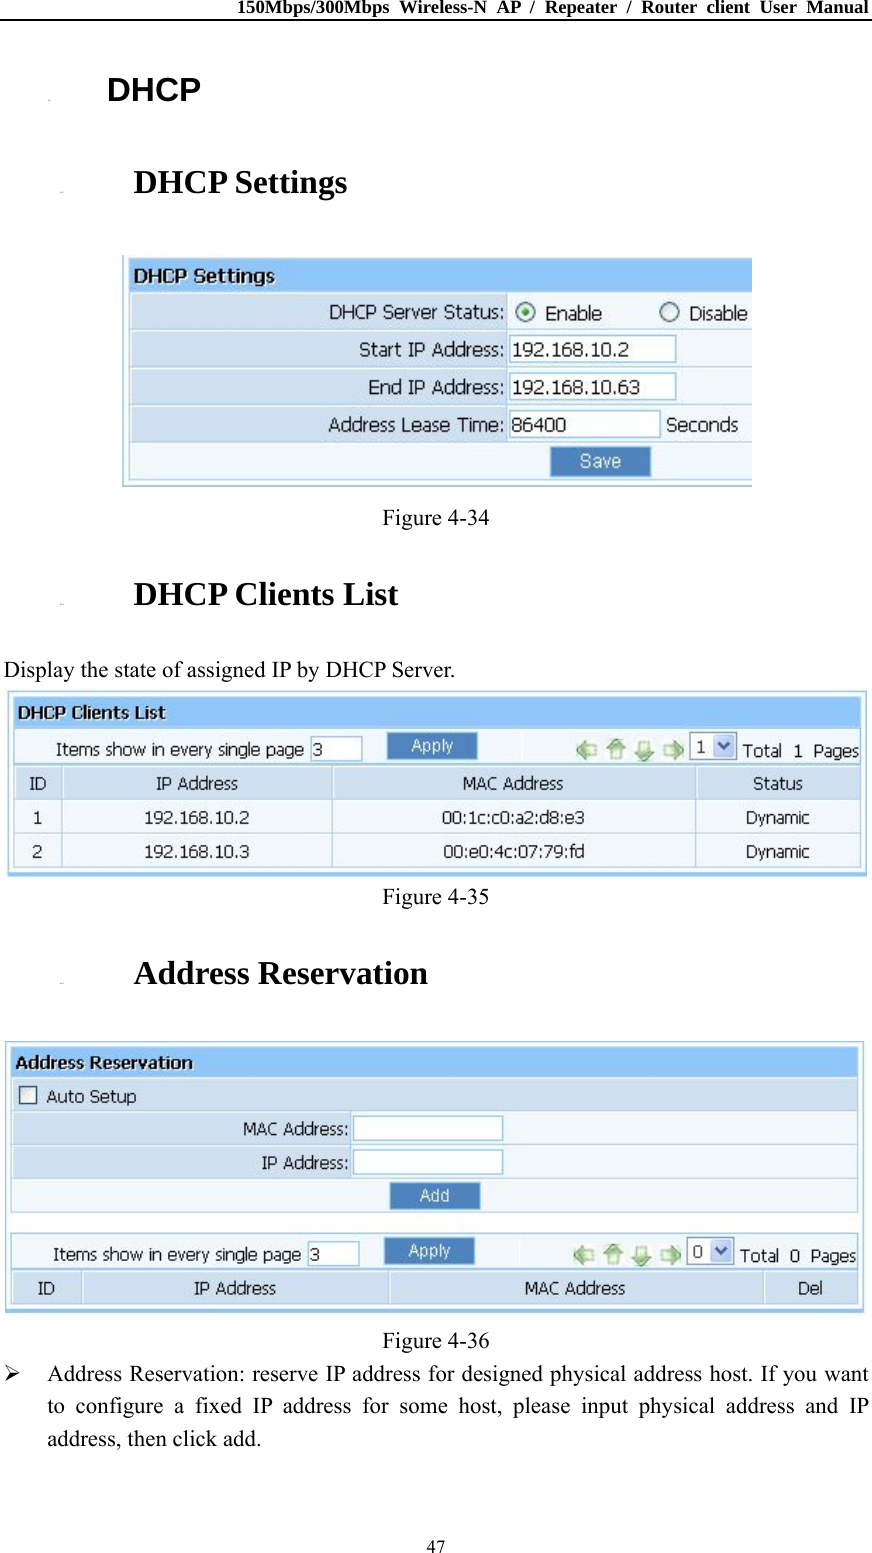 150Mbps/300Mbps Wireless-N AP / Repeater / Router client User Manual  474.6. DHCP 4.6.1. DHCP Settings  Figure 4-34 4.6.2. DHCP Clients List Display the state of assigned IP by DHCP Server.  Figure 4-35 4.6.3. Address Reservation  Figure 4-36  Address Reservation: reserve IP address for designed physical address host. If you want to configure a fixed IP address for some host, please input physical address and IP address, then click add. 